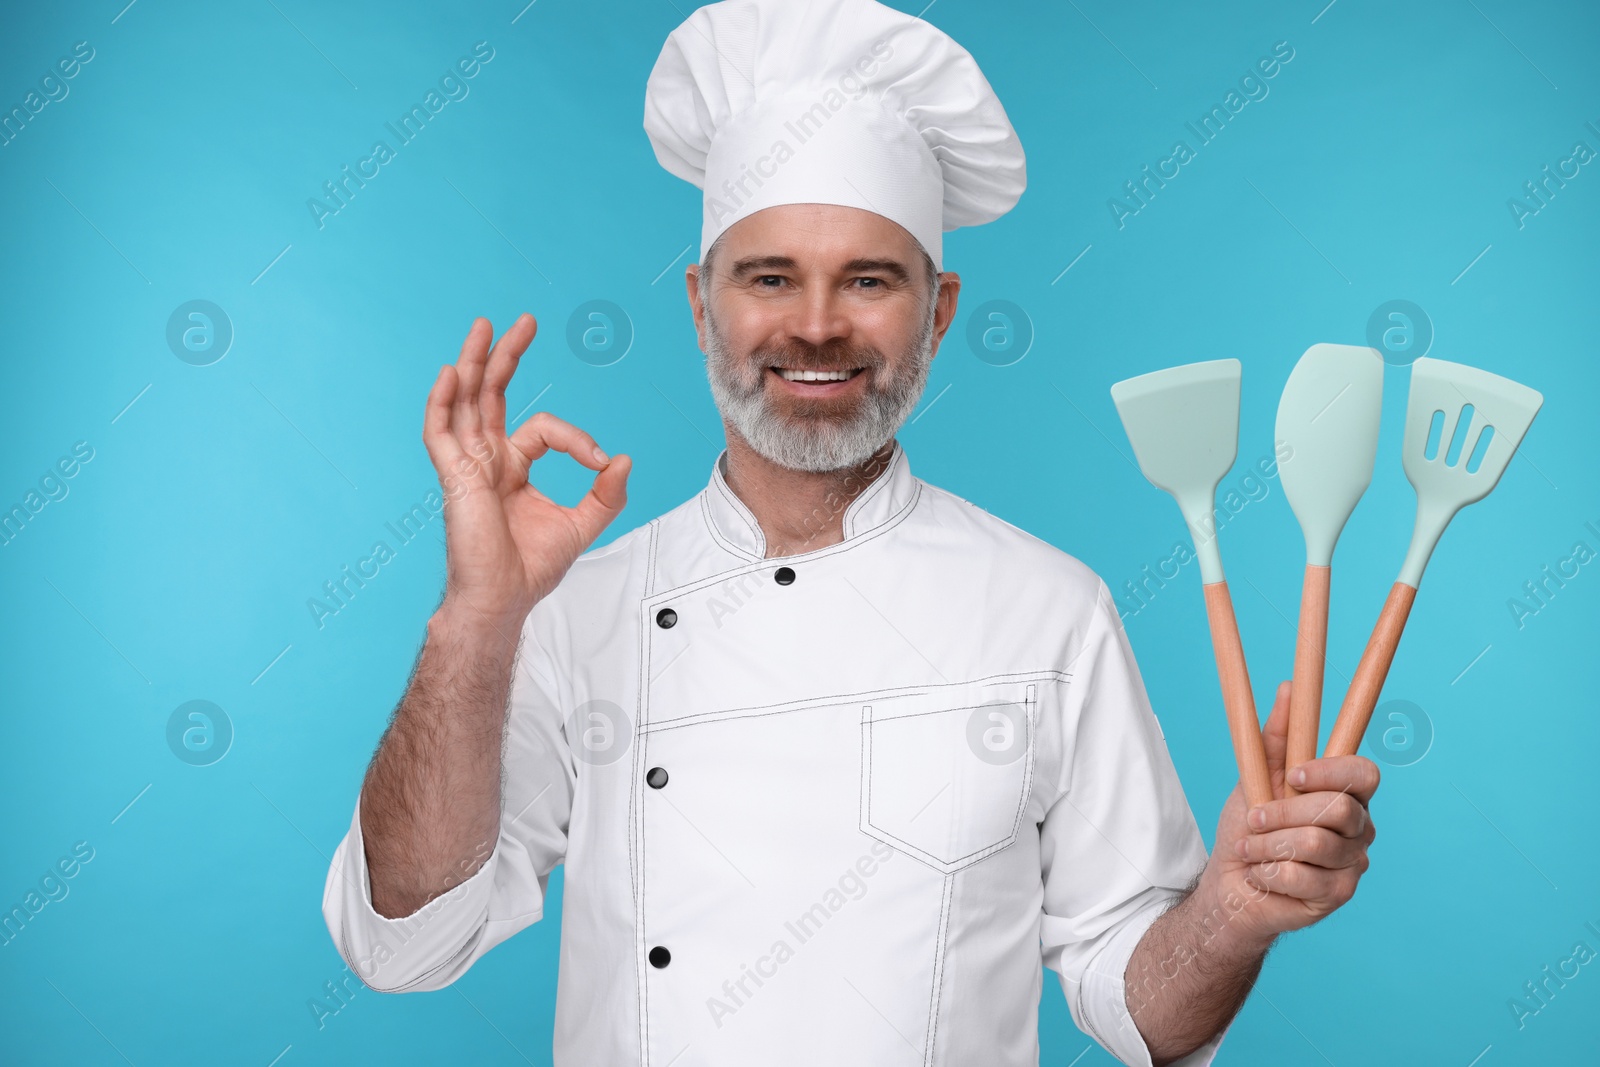 Photo of Happy chef in uniform with kitchen utensils showing OK gesture on light blue background